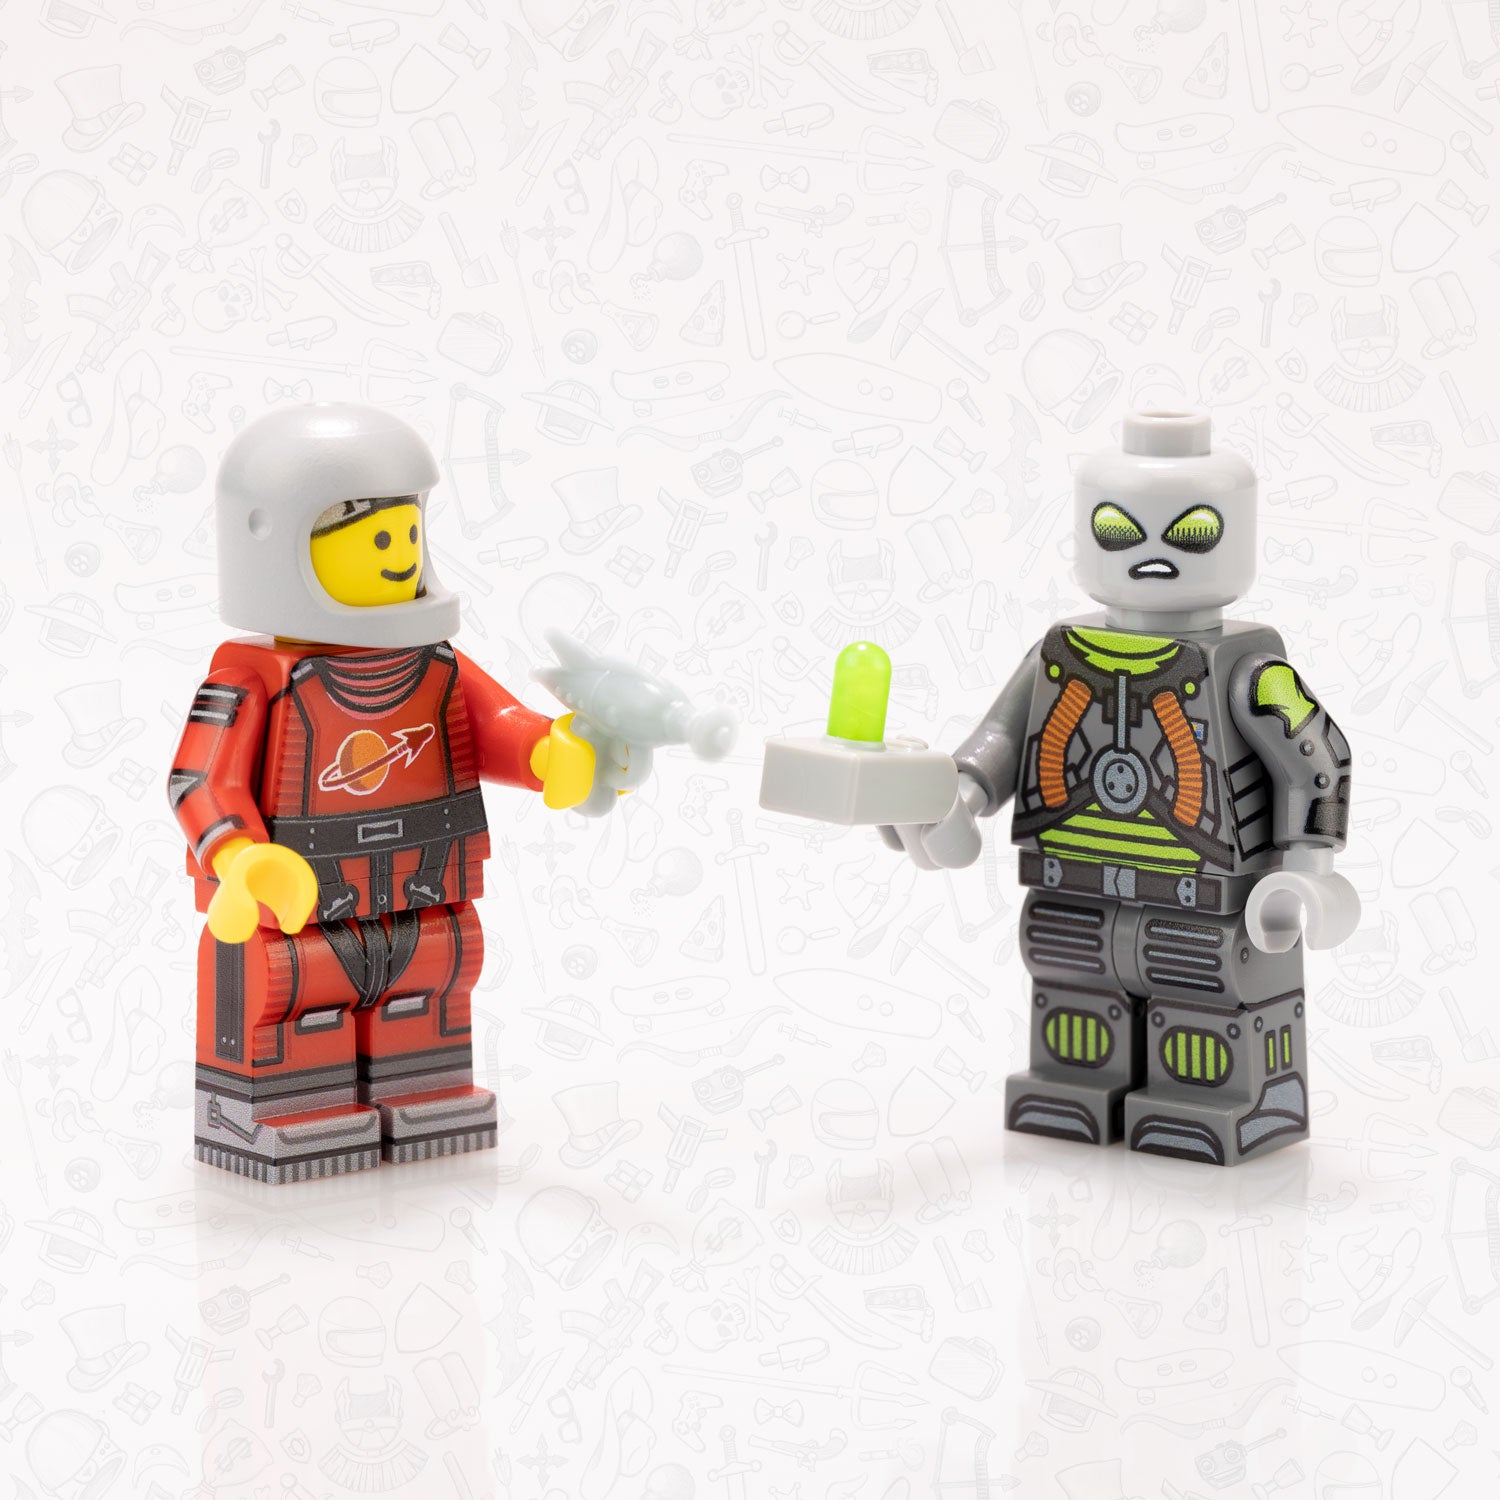 Custom Printed Lego - MinifigsMonthly June Leftovers - The Minifig Co.